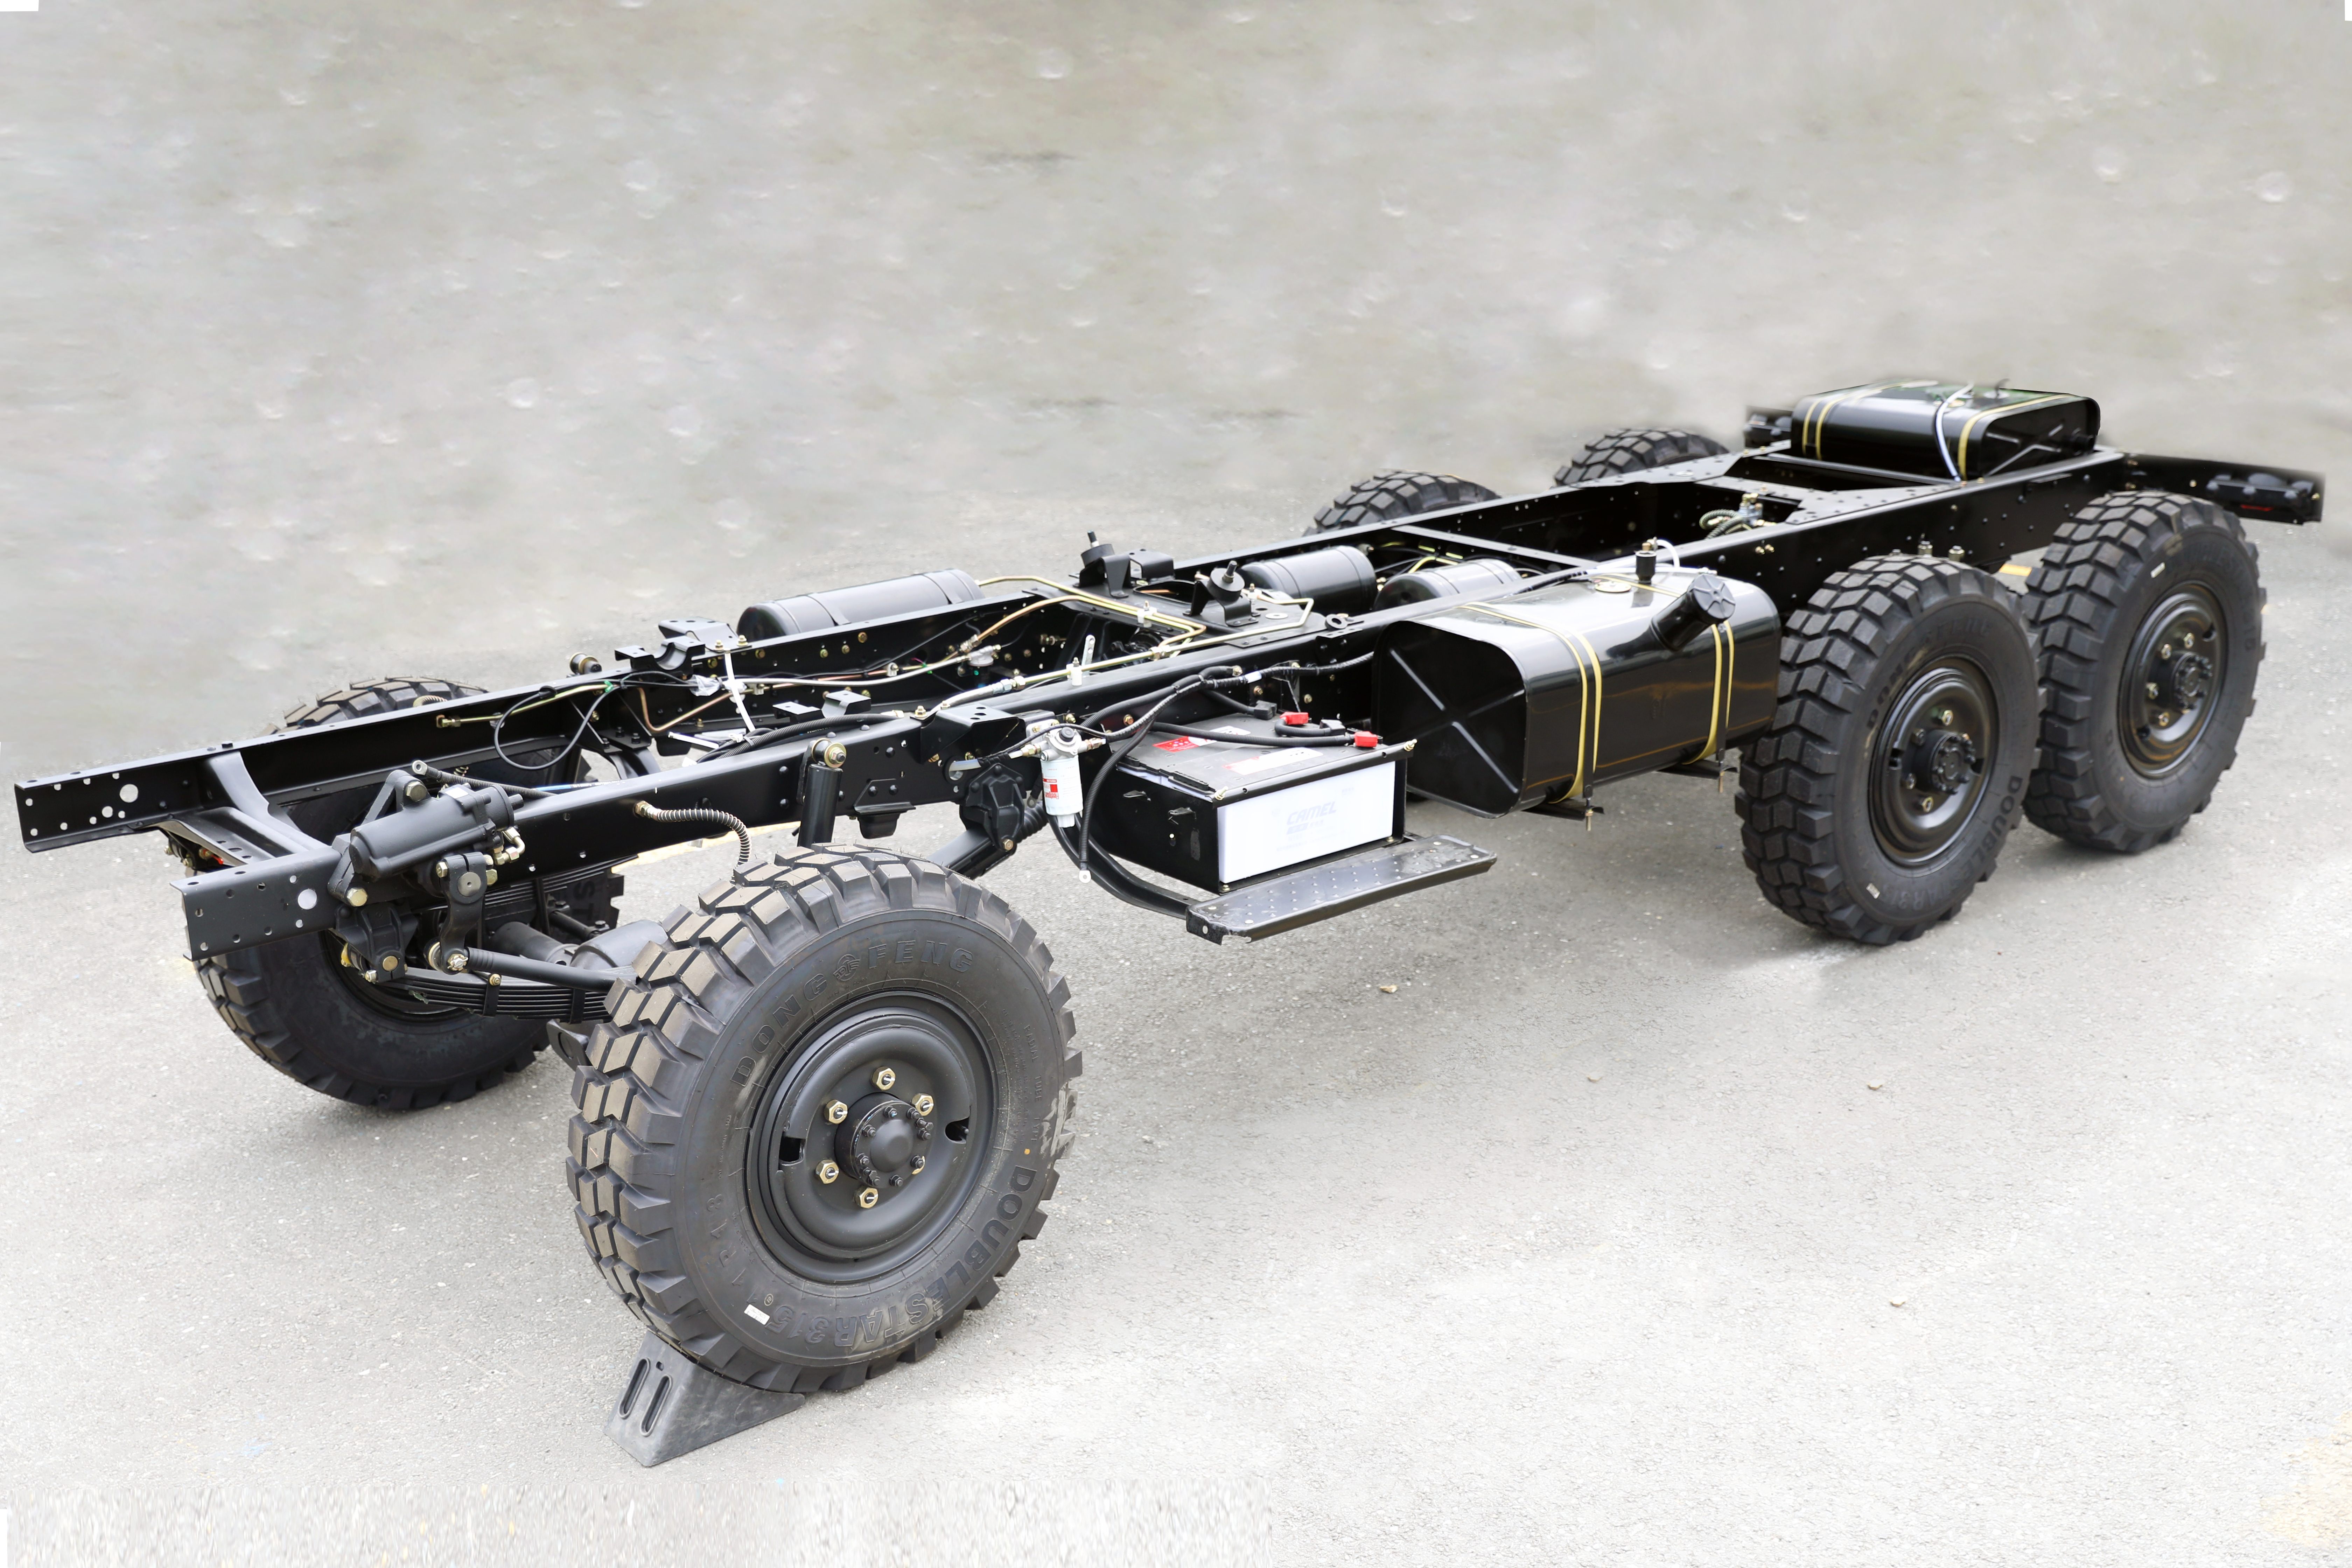 Shocking the vehicle world, the king of chassis is now available!